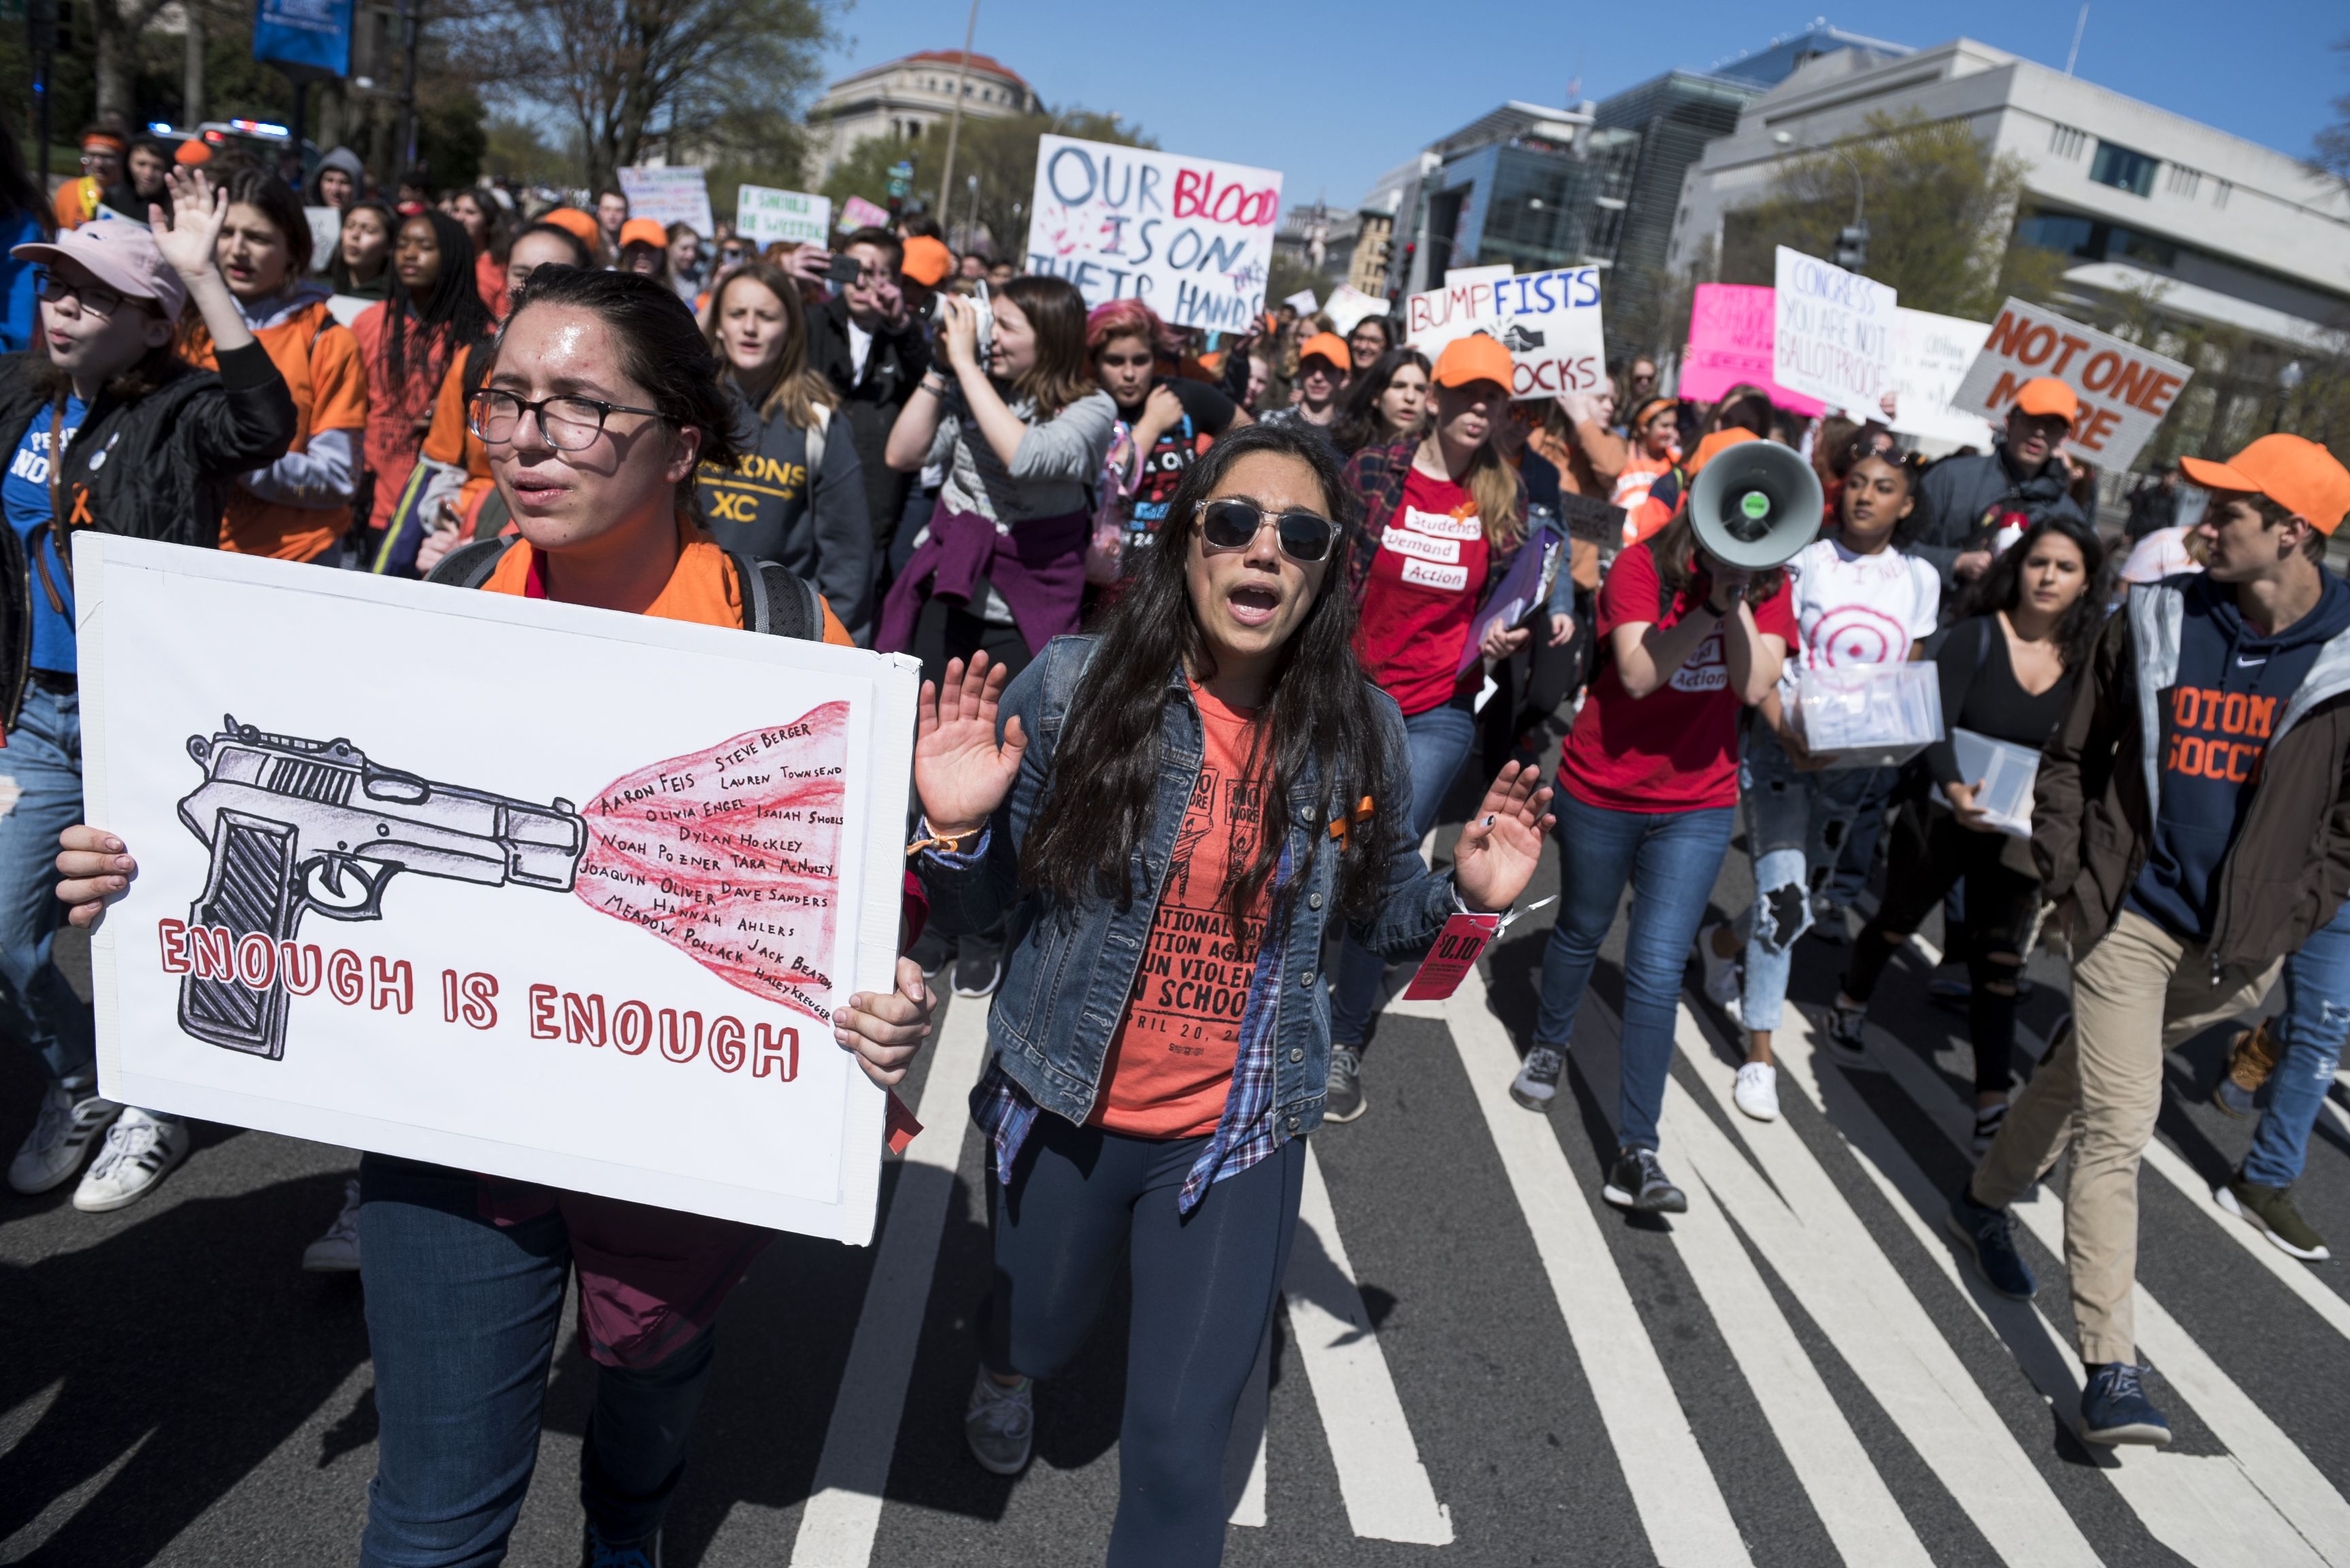 Students Across the Country Walked Out of School on the Anniversary of the  Columbine School Shooting